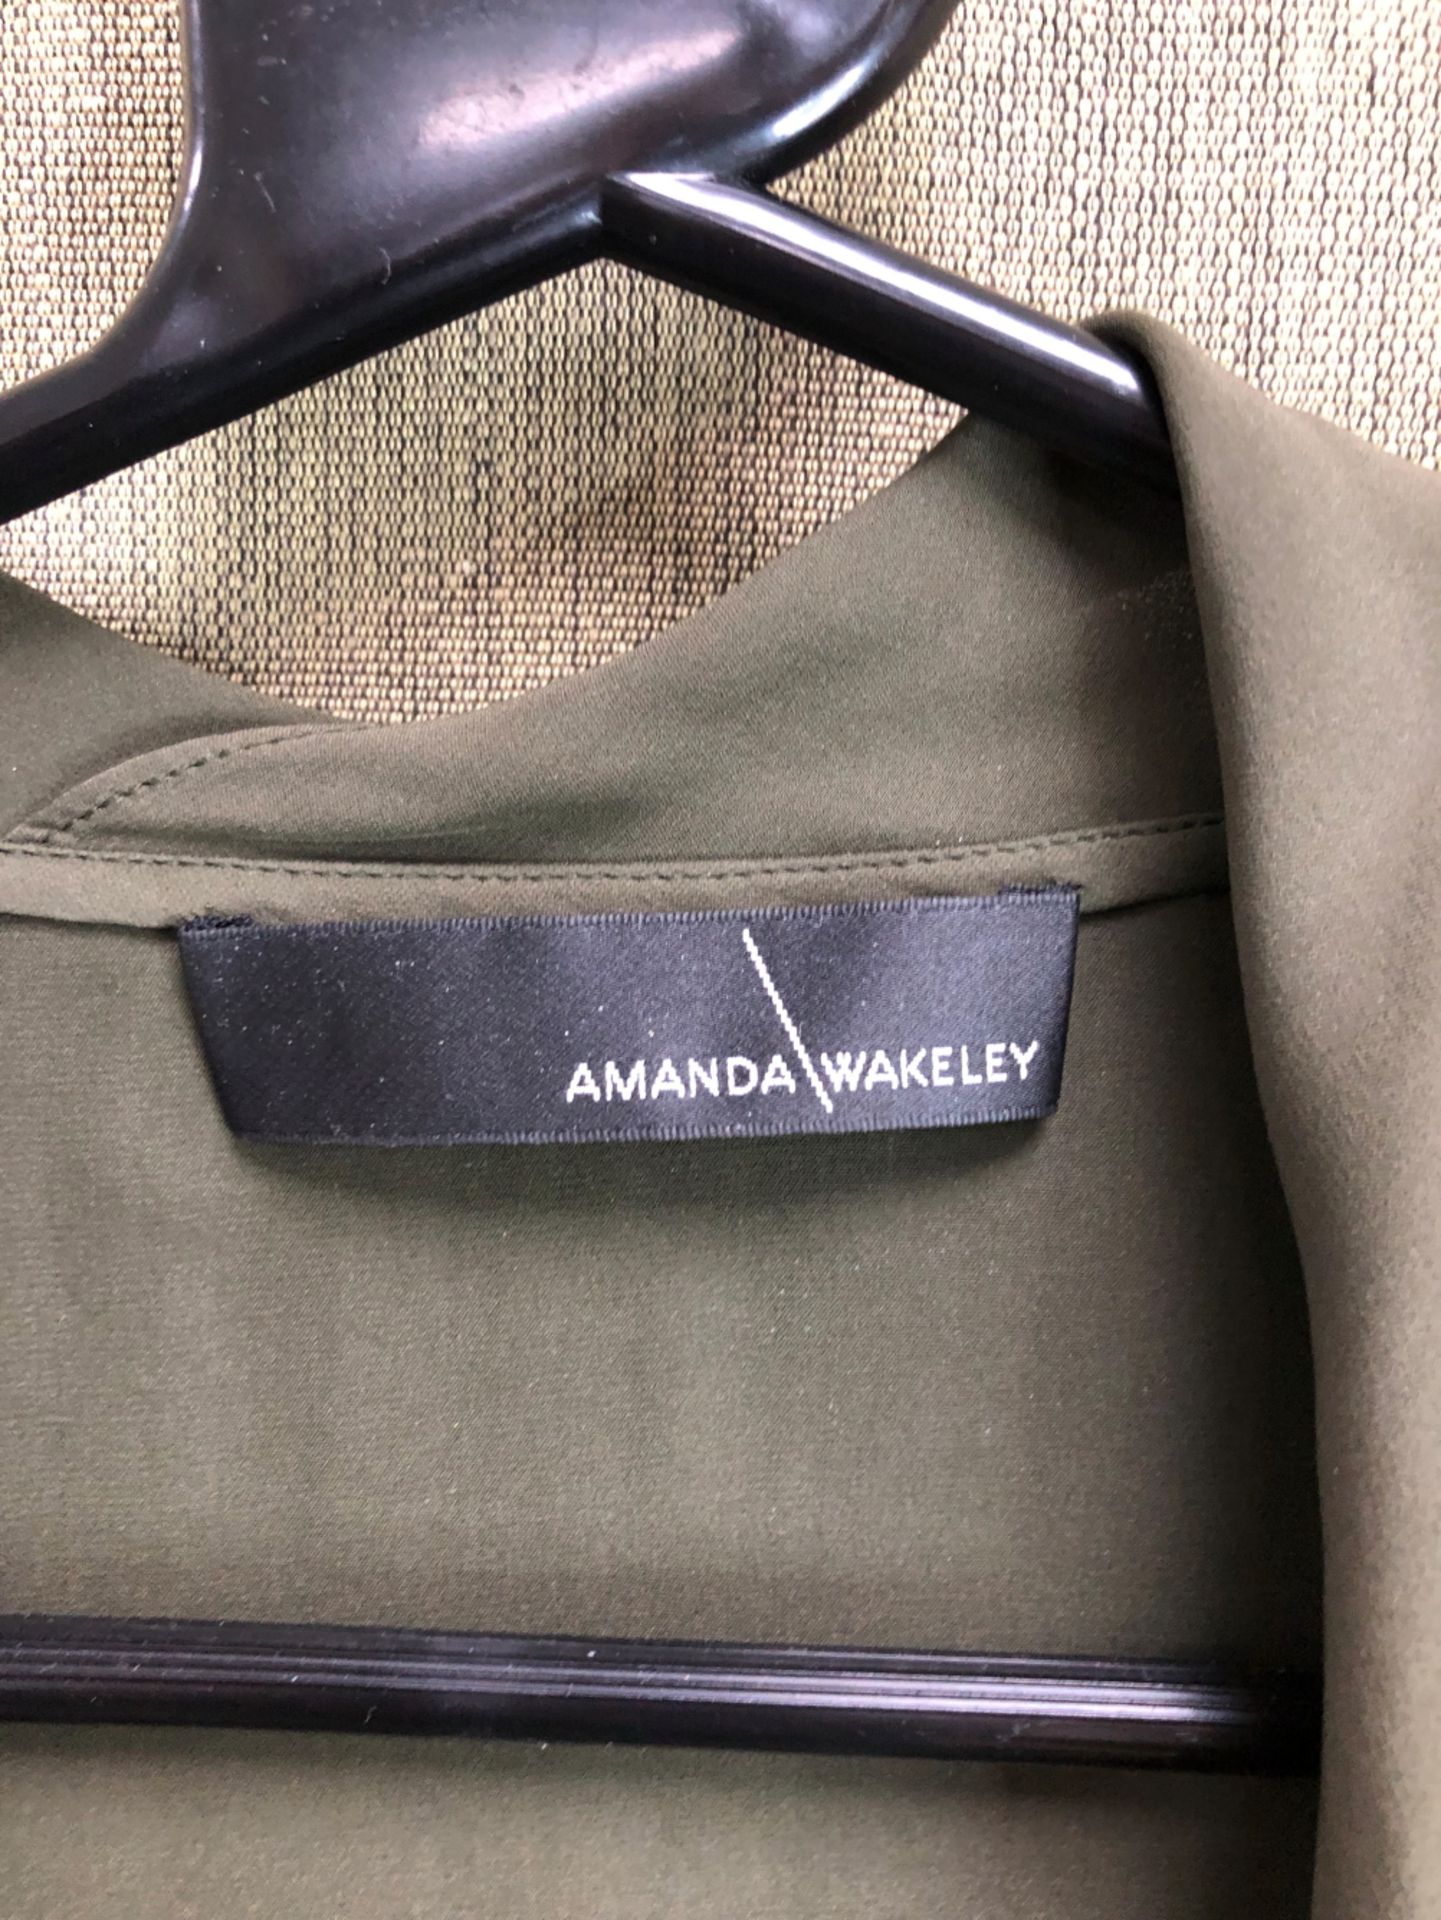 AN AMANDA WAKELEY OLIVE GREEN SILK BLOUSE SIZE 14, TOGETHER WITH A PAIR OF JING WANG FLARED JEANS - Image 12 of 16